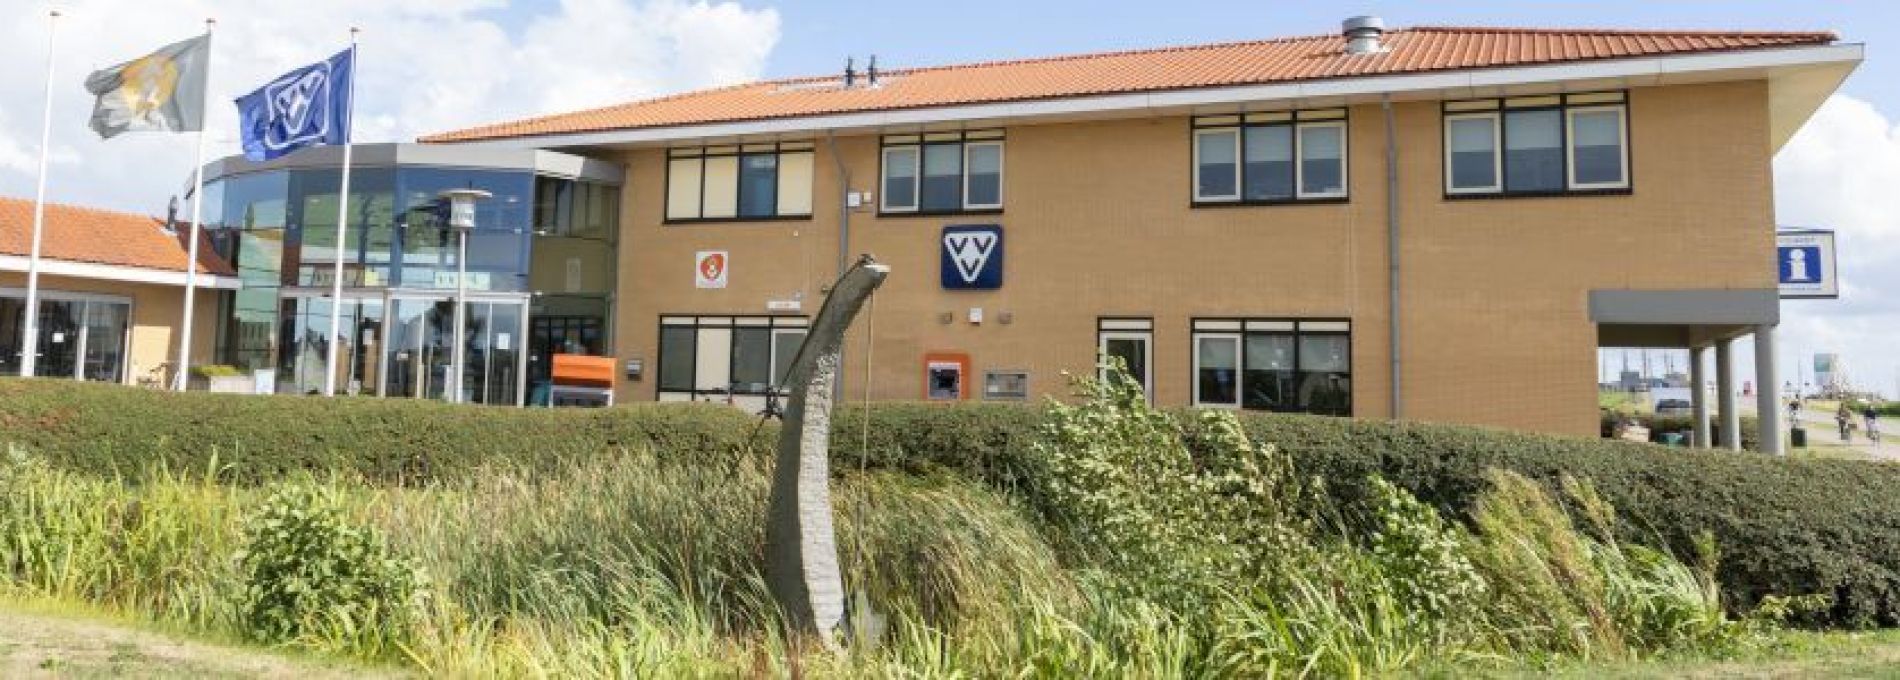 General frequently asked questions about Ameland - Tourist Information Centre VVV Ameland